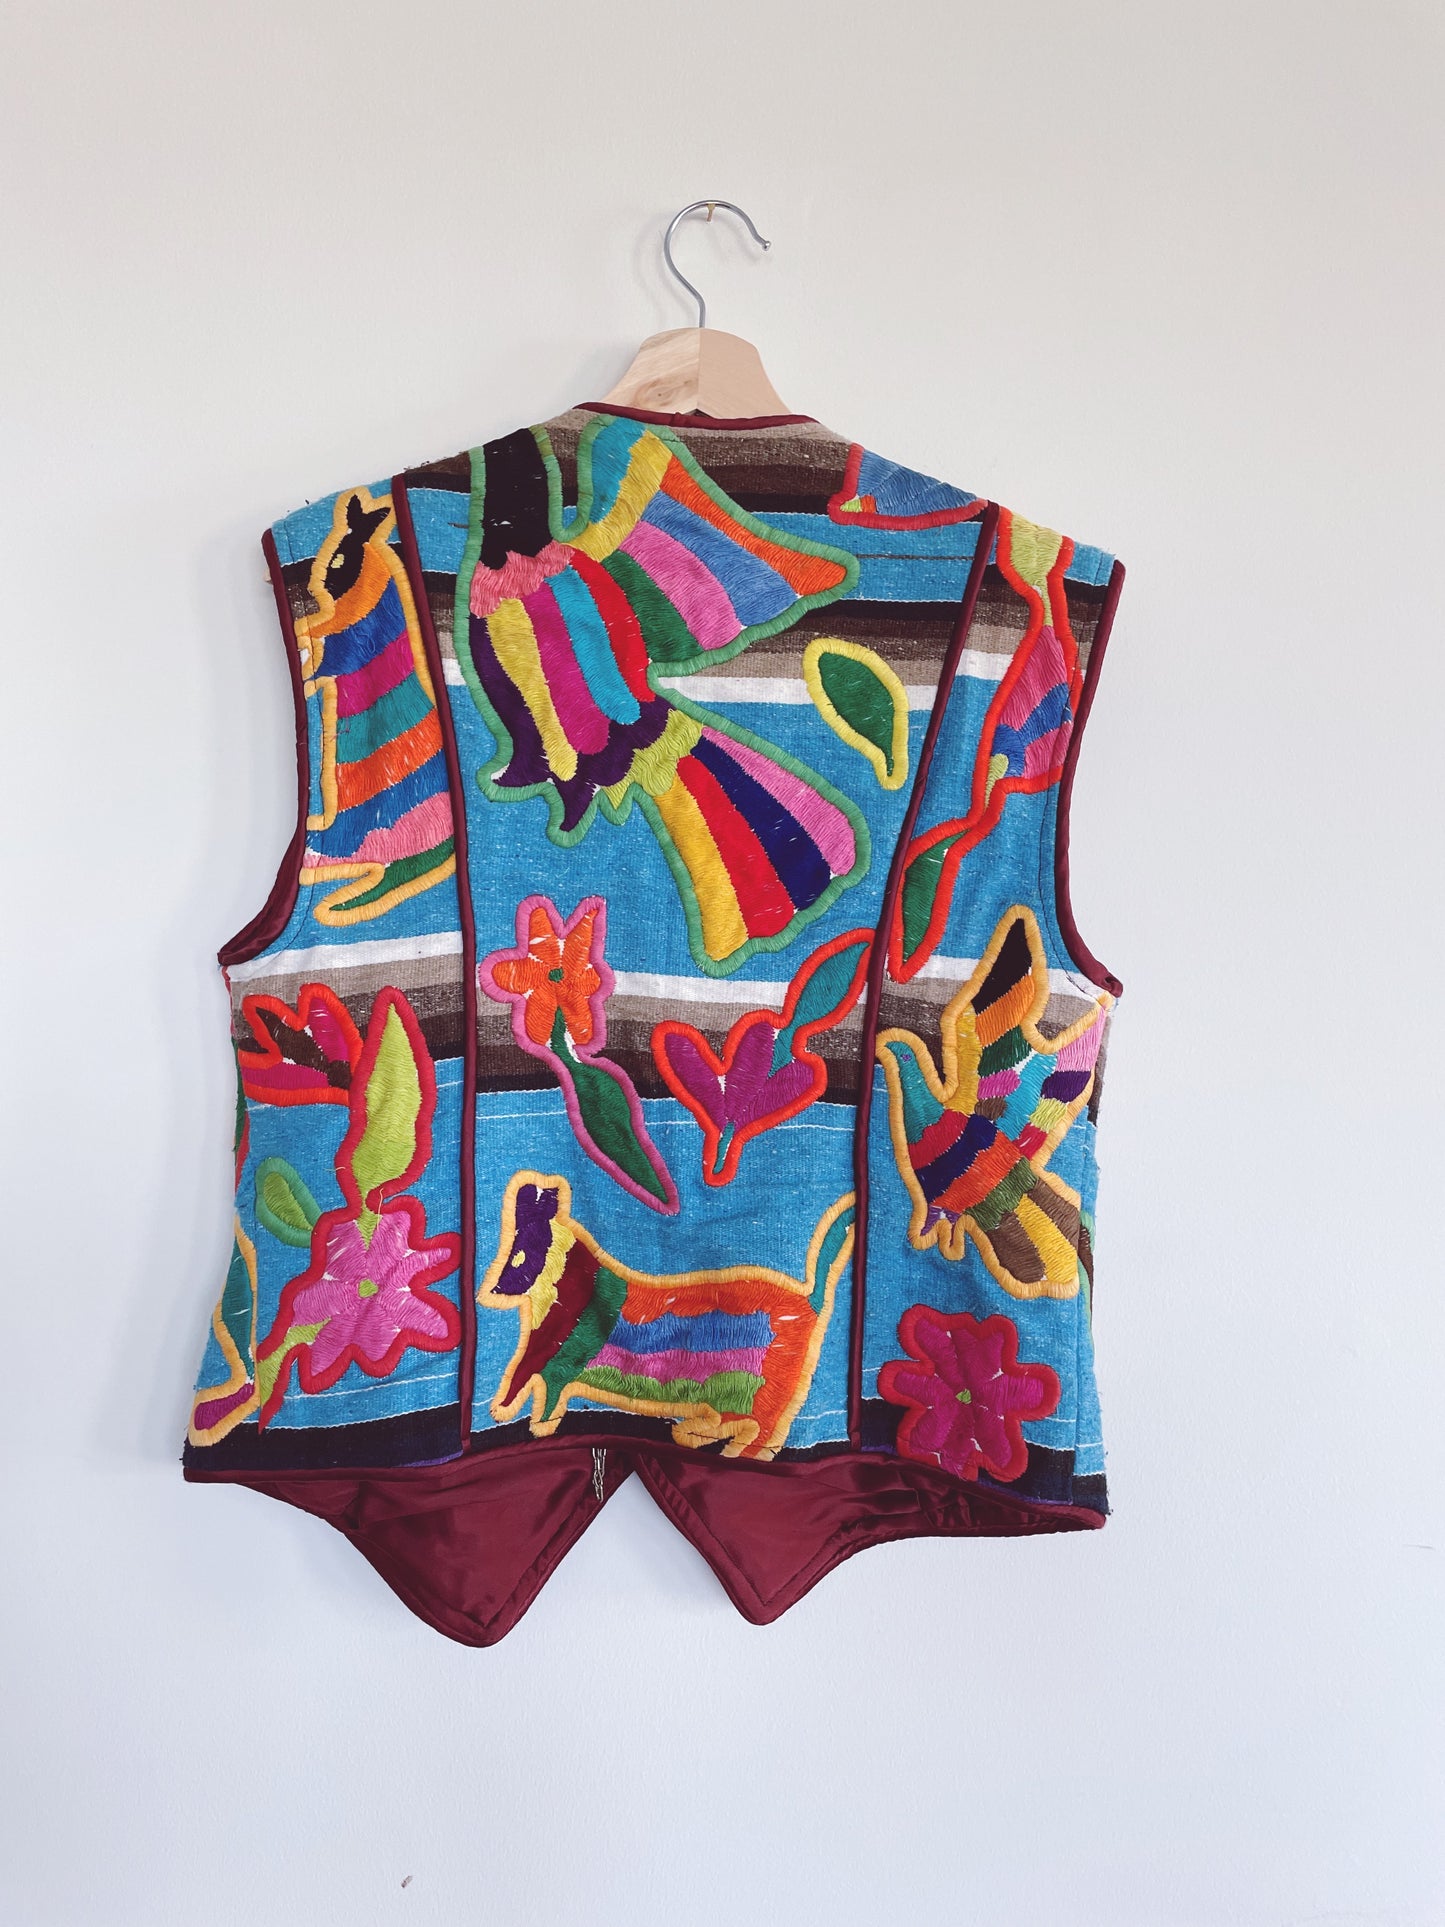 JUDITH ROBERTS Patchwork Embroidered Vest S - L